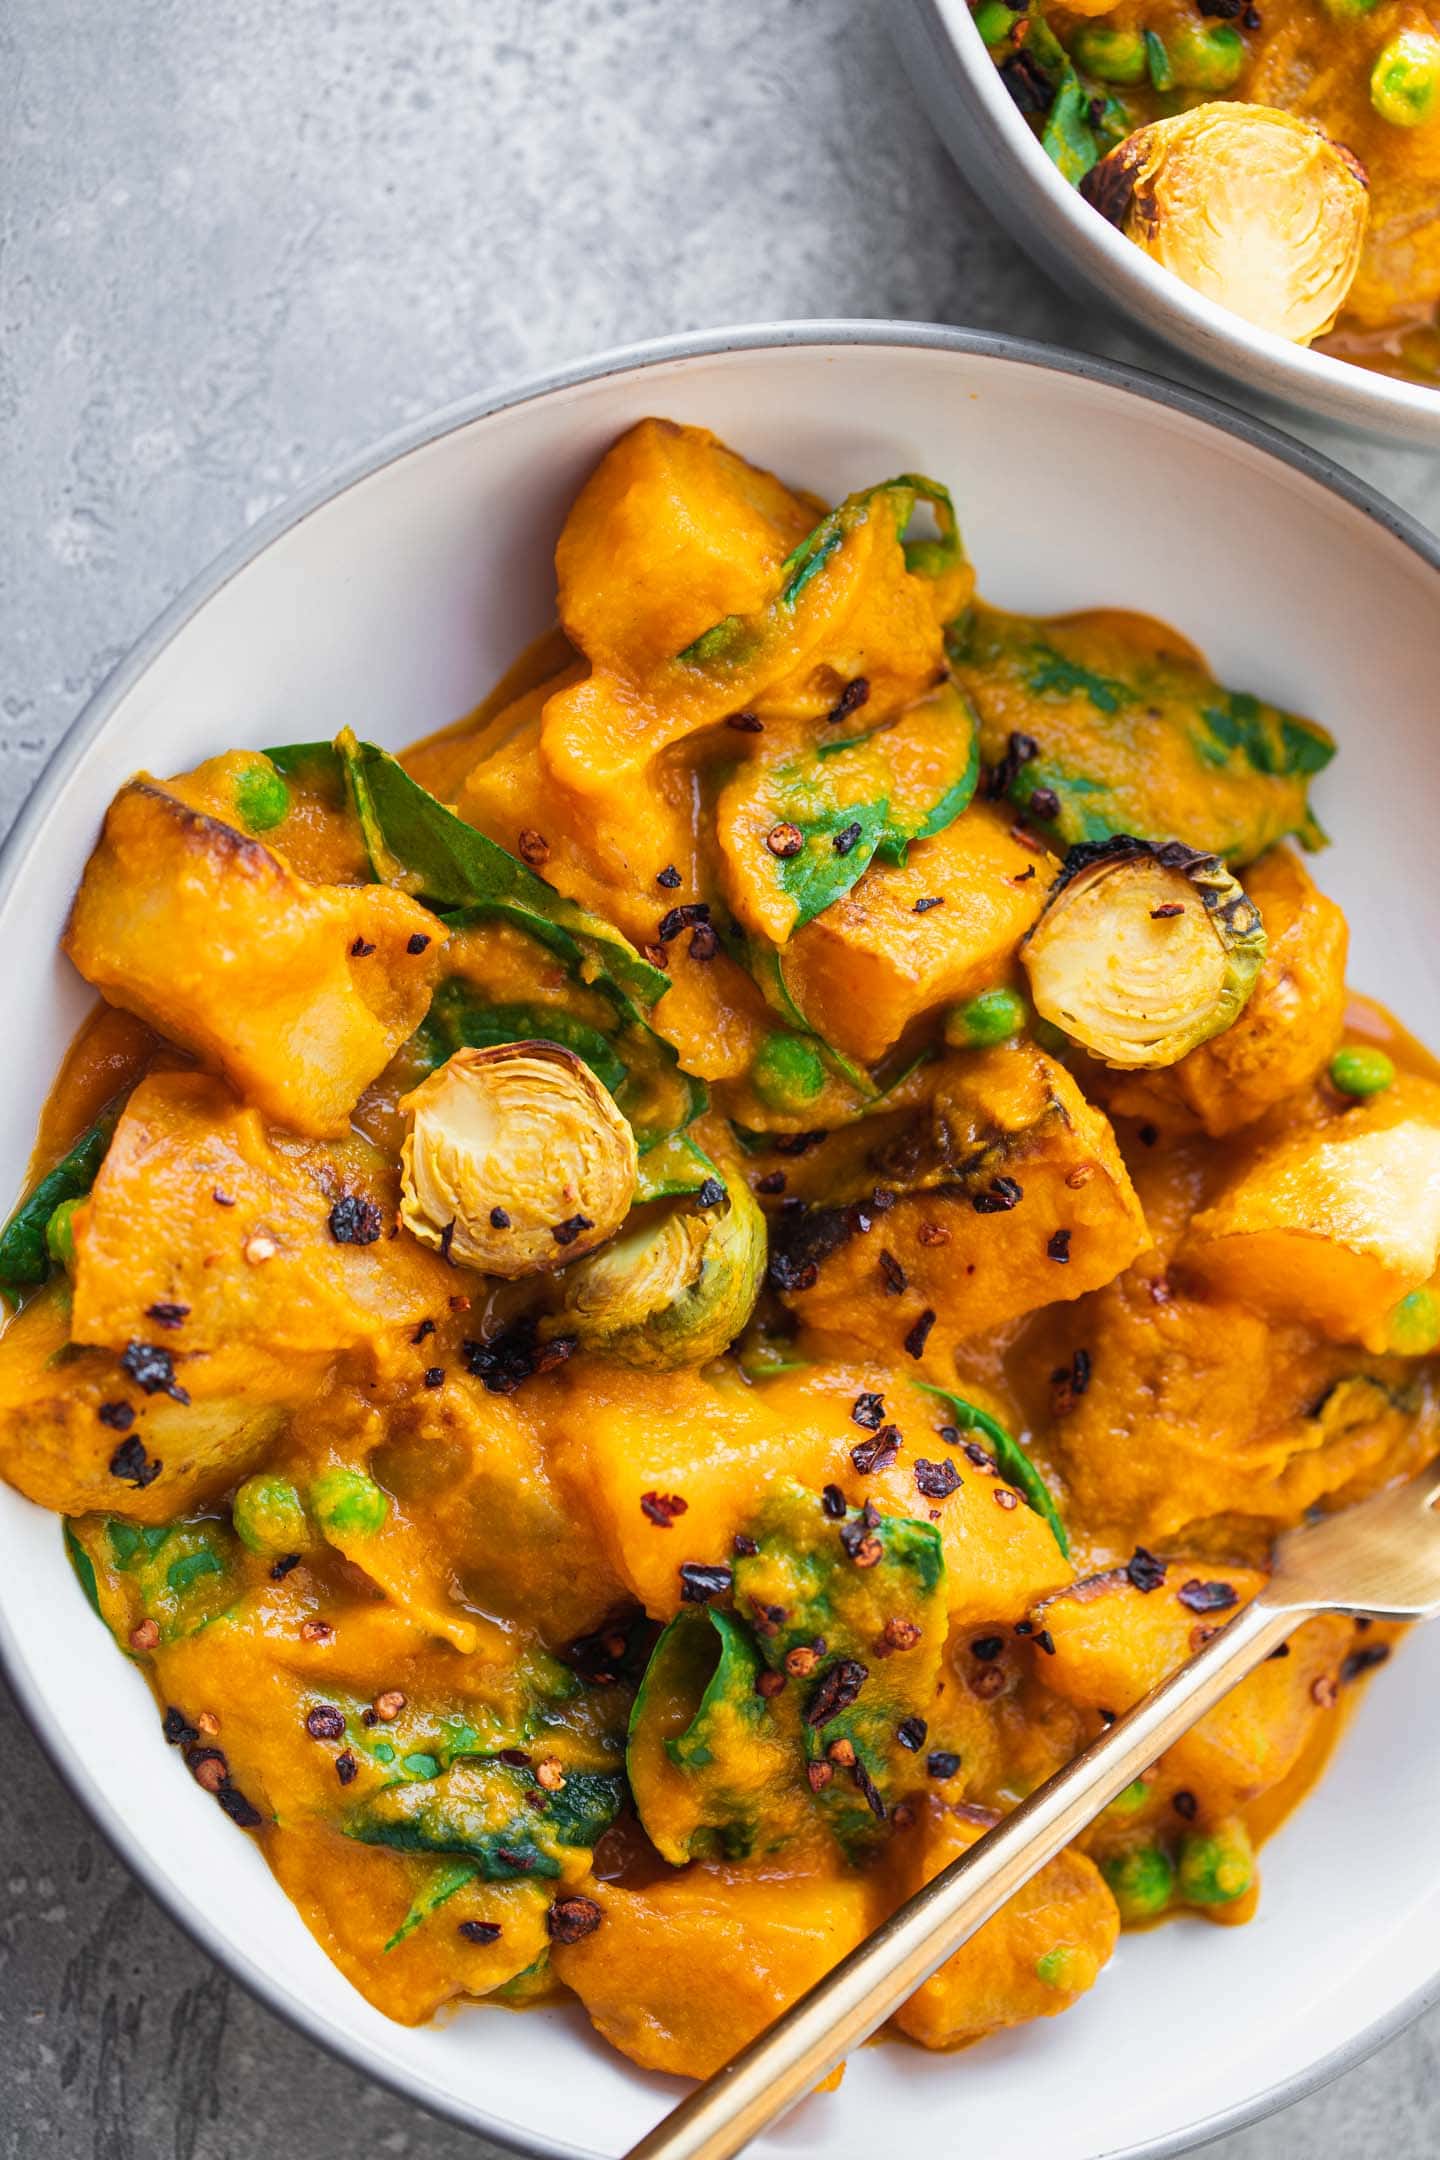 Butternut squash sauce with roasted vegetables